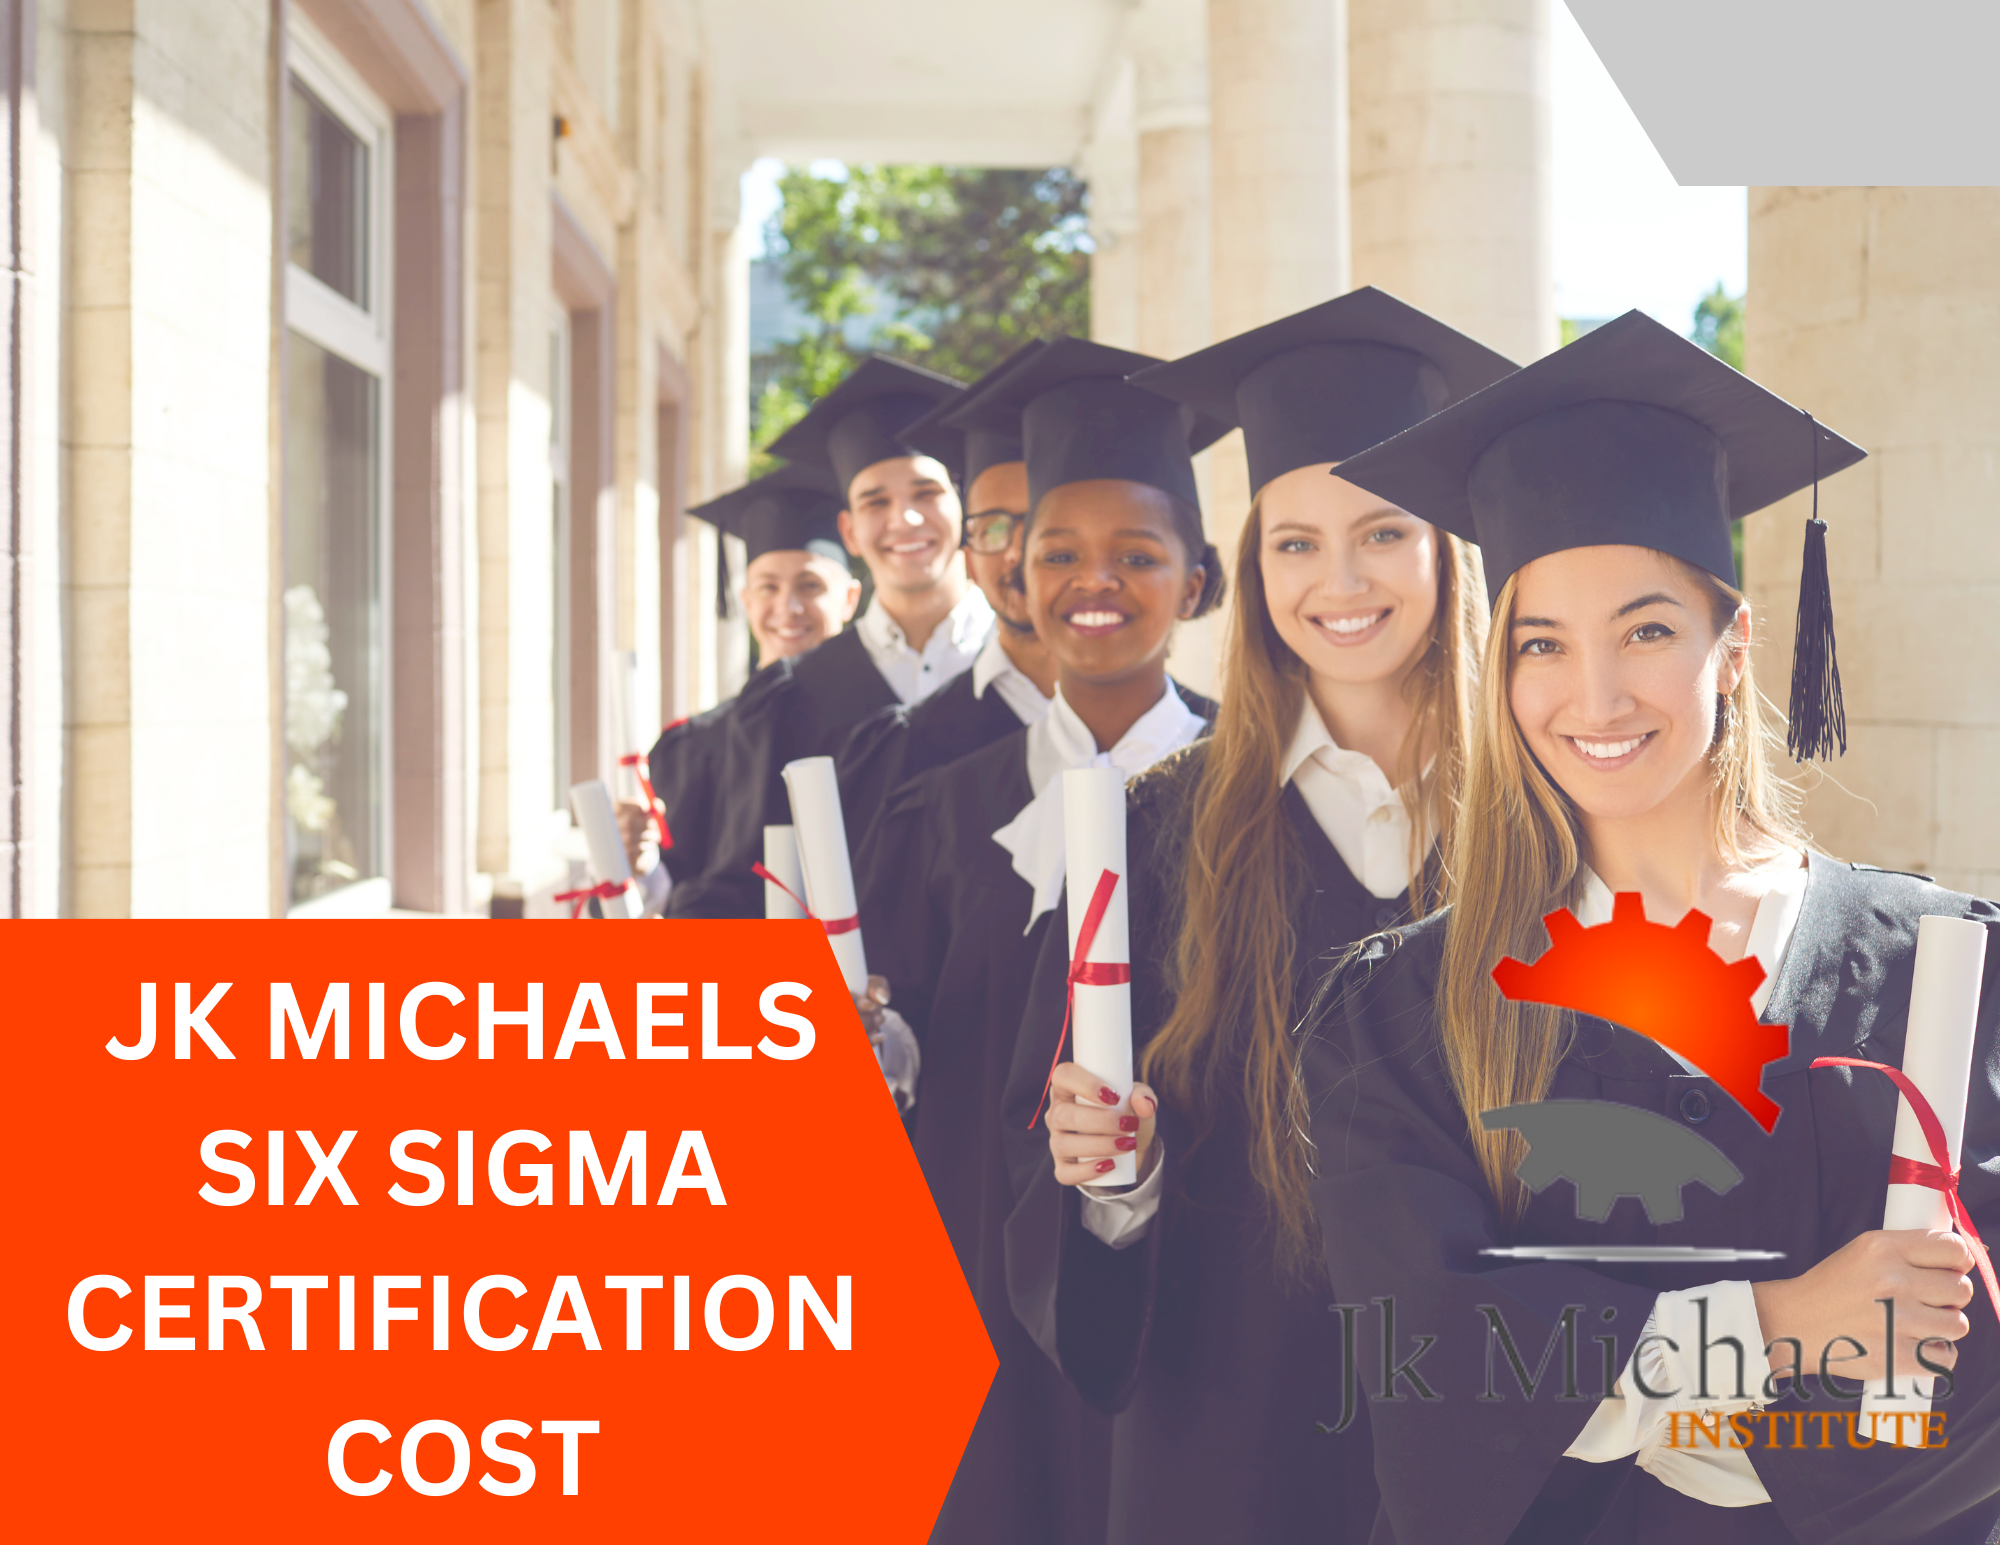 SIX SIGMA CERTIFICATION COST